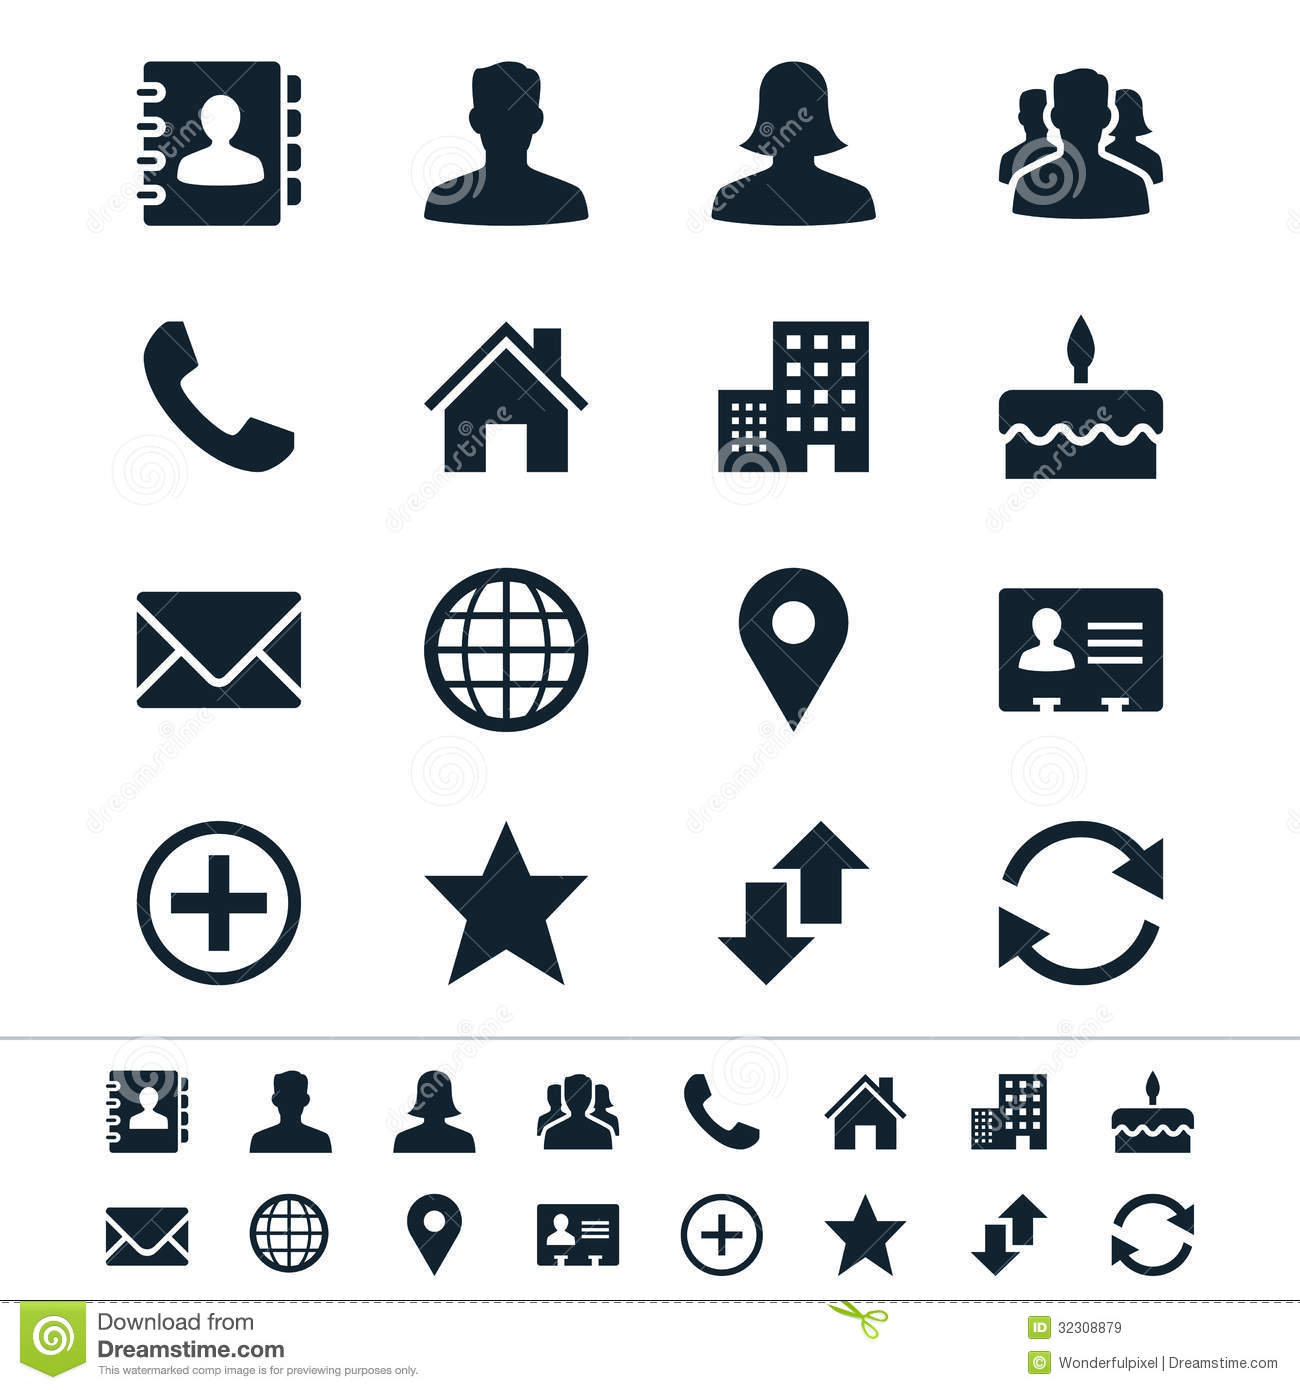 Contact Icons Vector